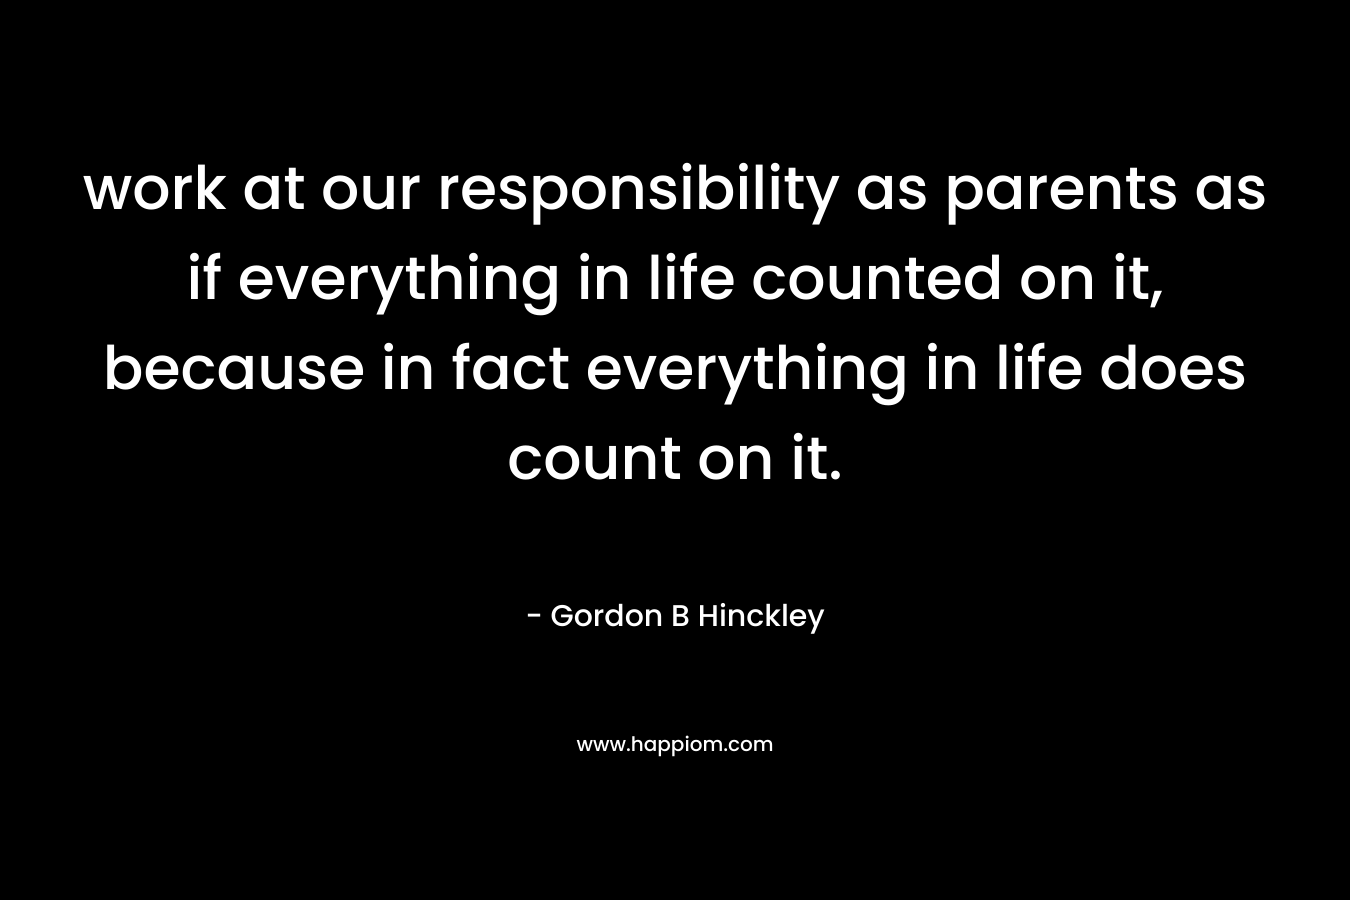 work at our responsibility as parents as if everything in life counted on it, because in fact everything in life does count on it.